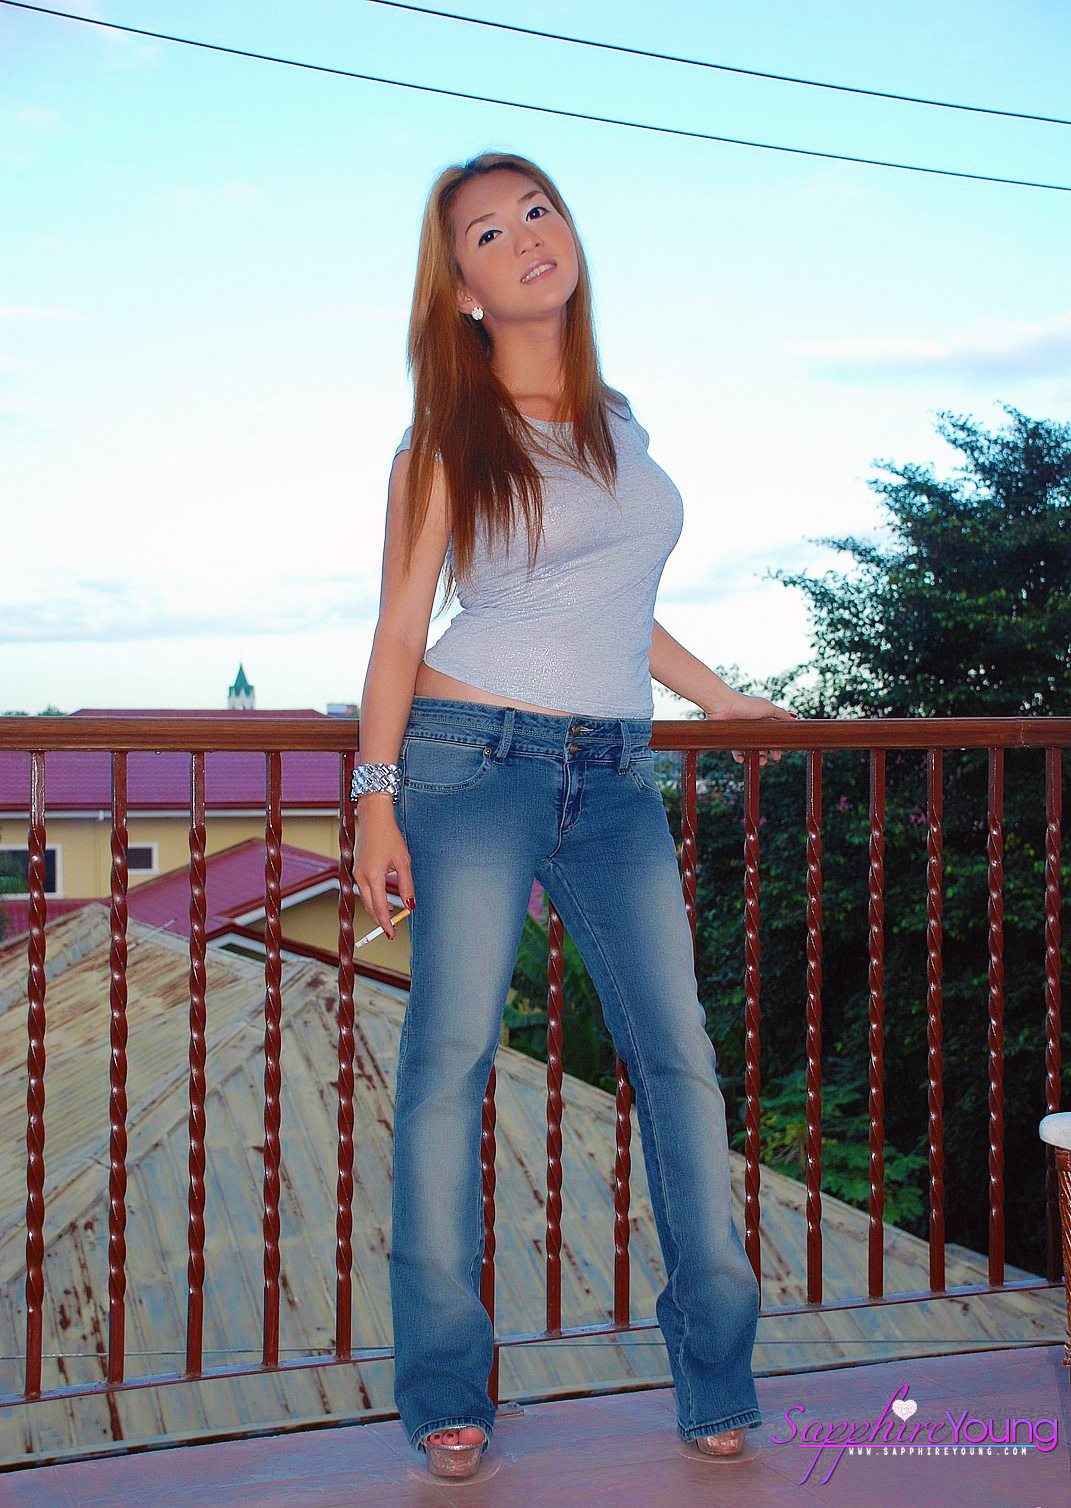 Sapphire Young Strips off her jeans. 